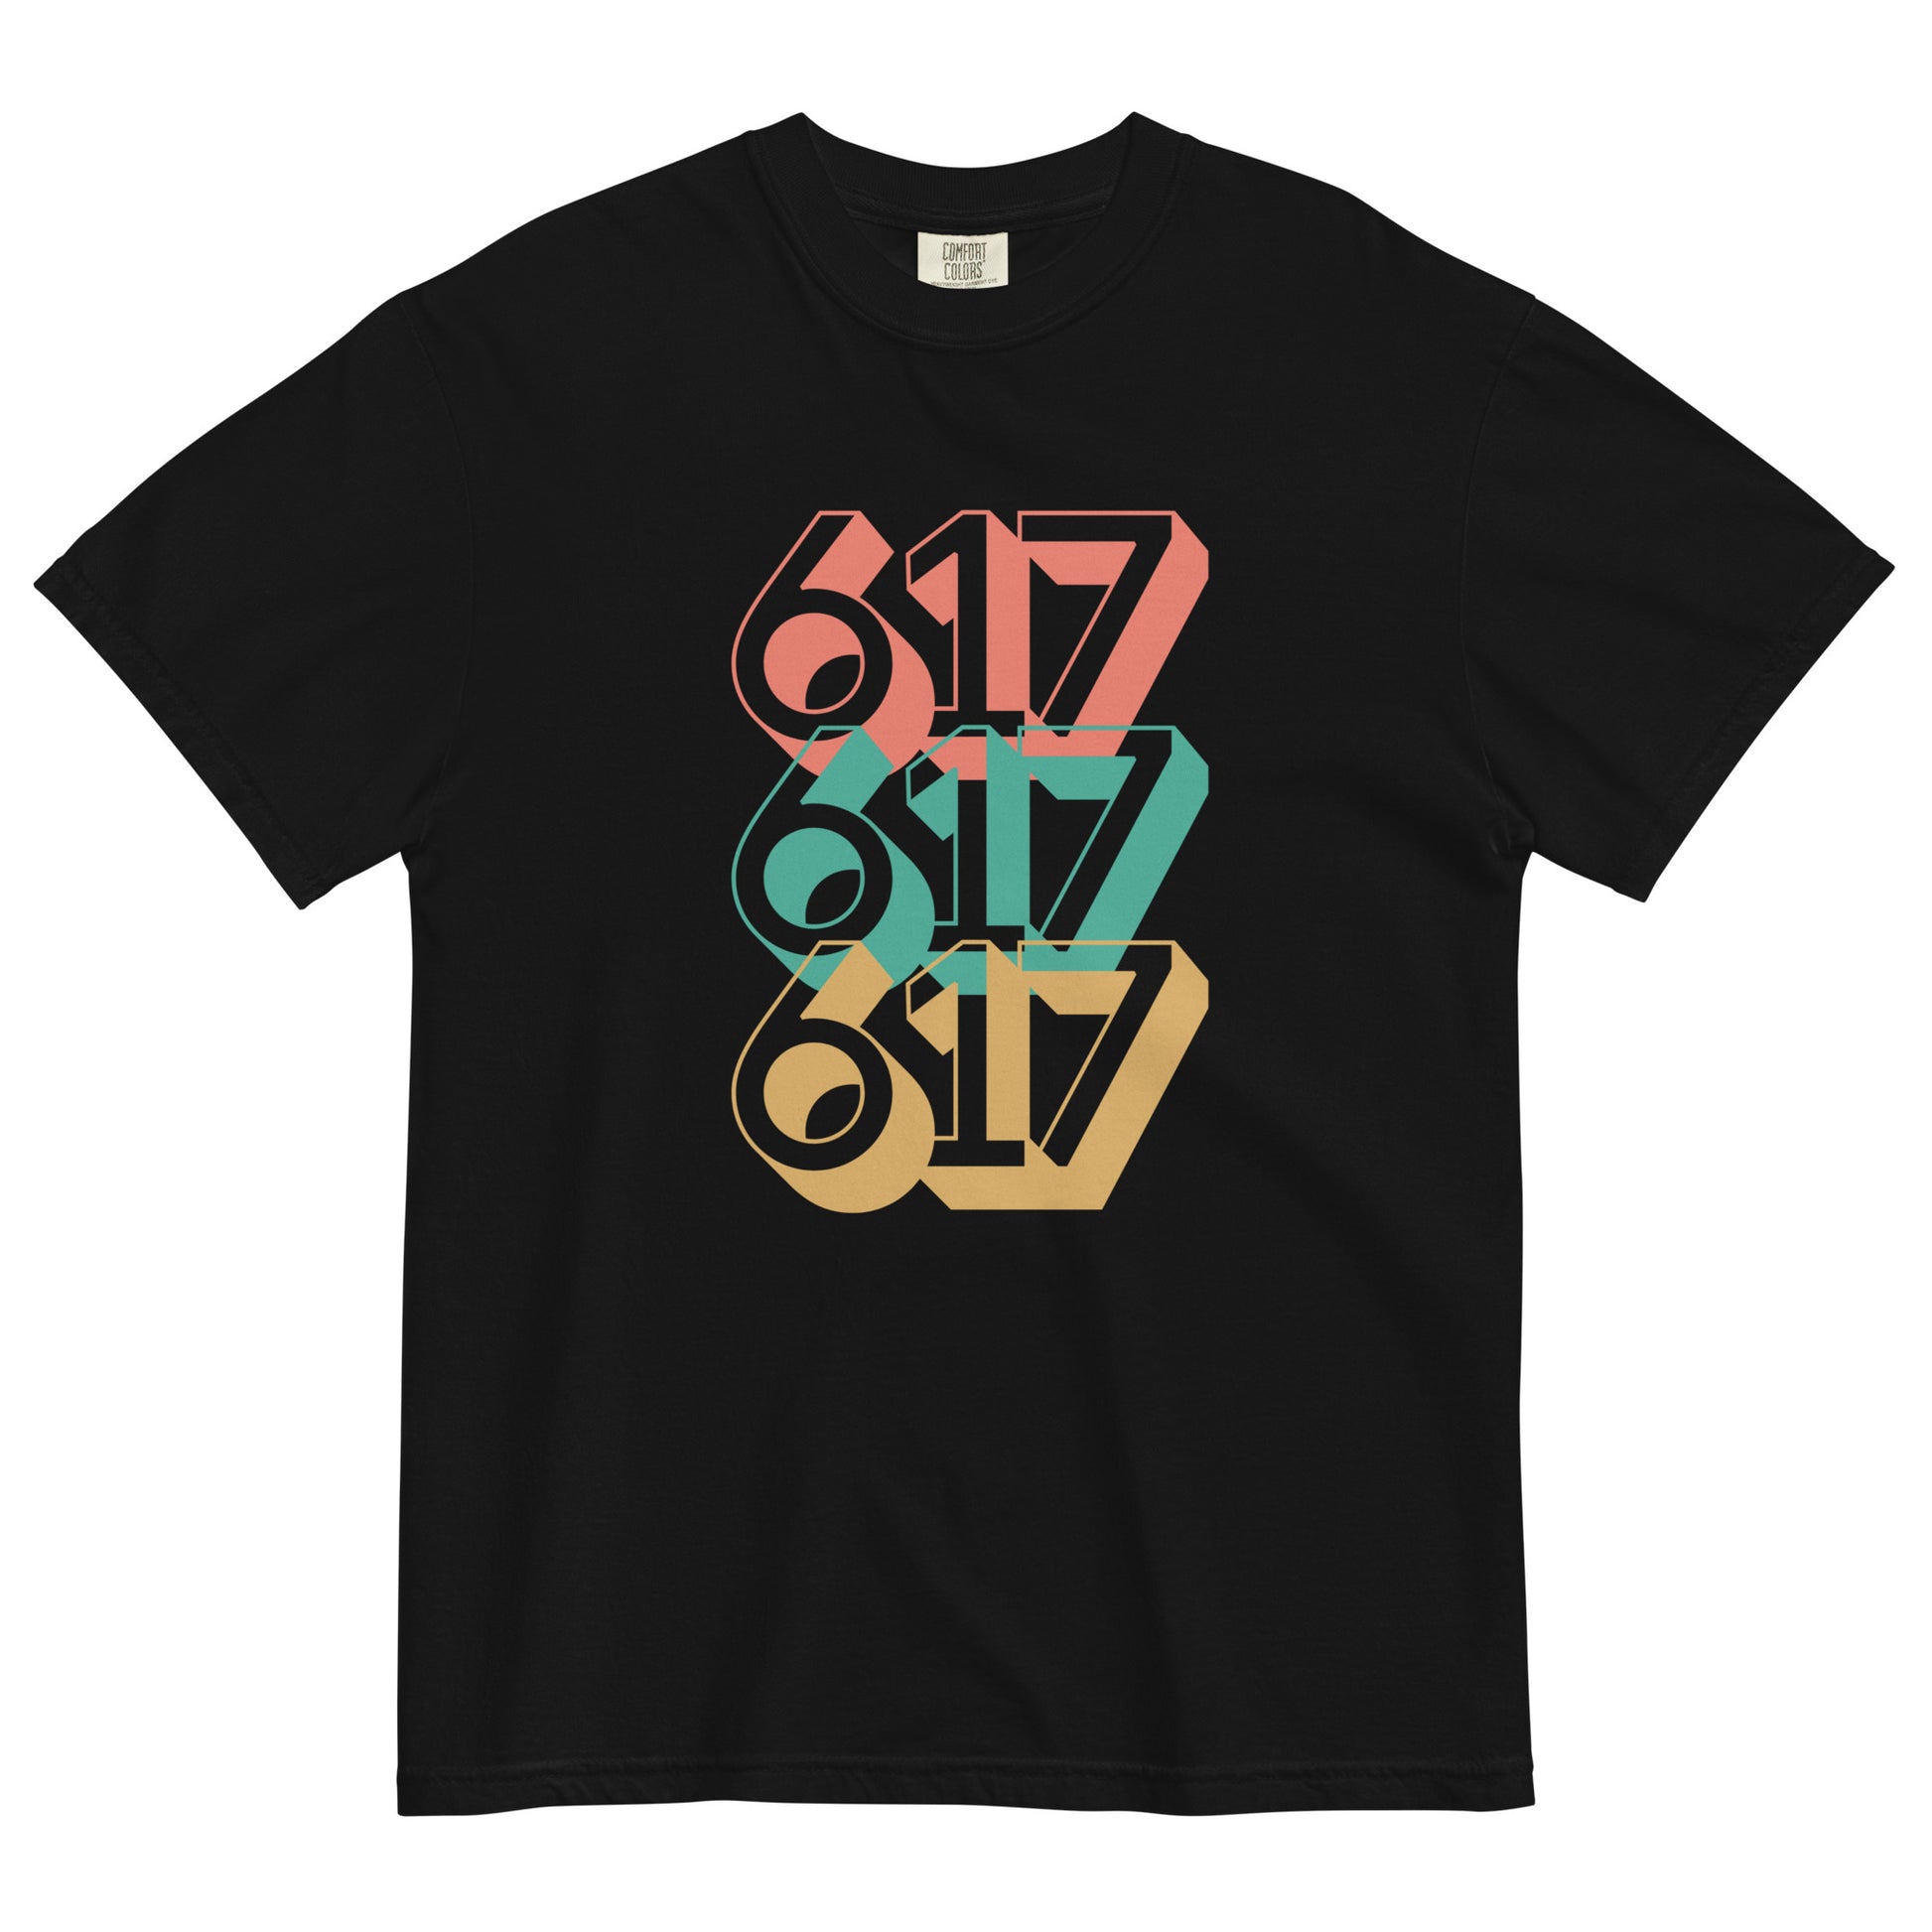 black tshirt with three 617s in red green and yellow